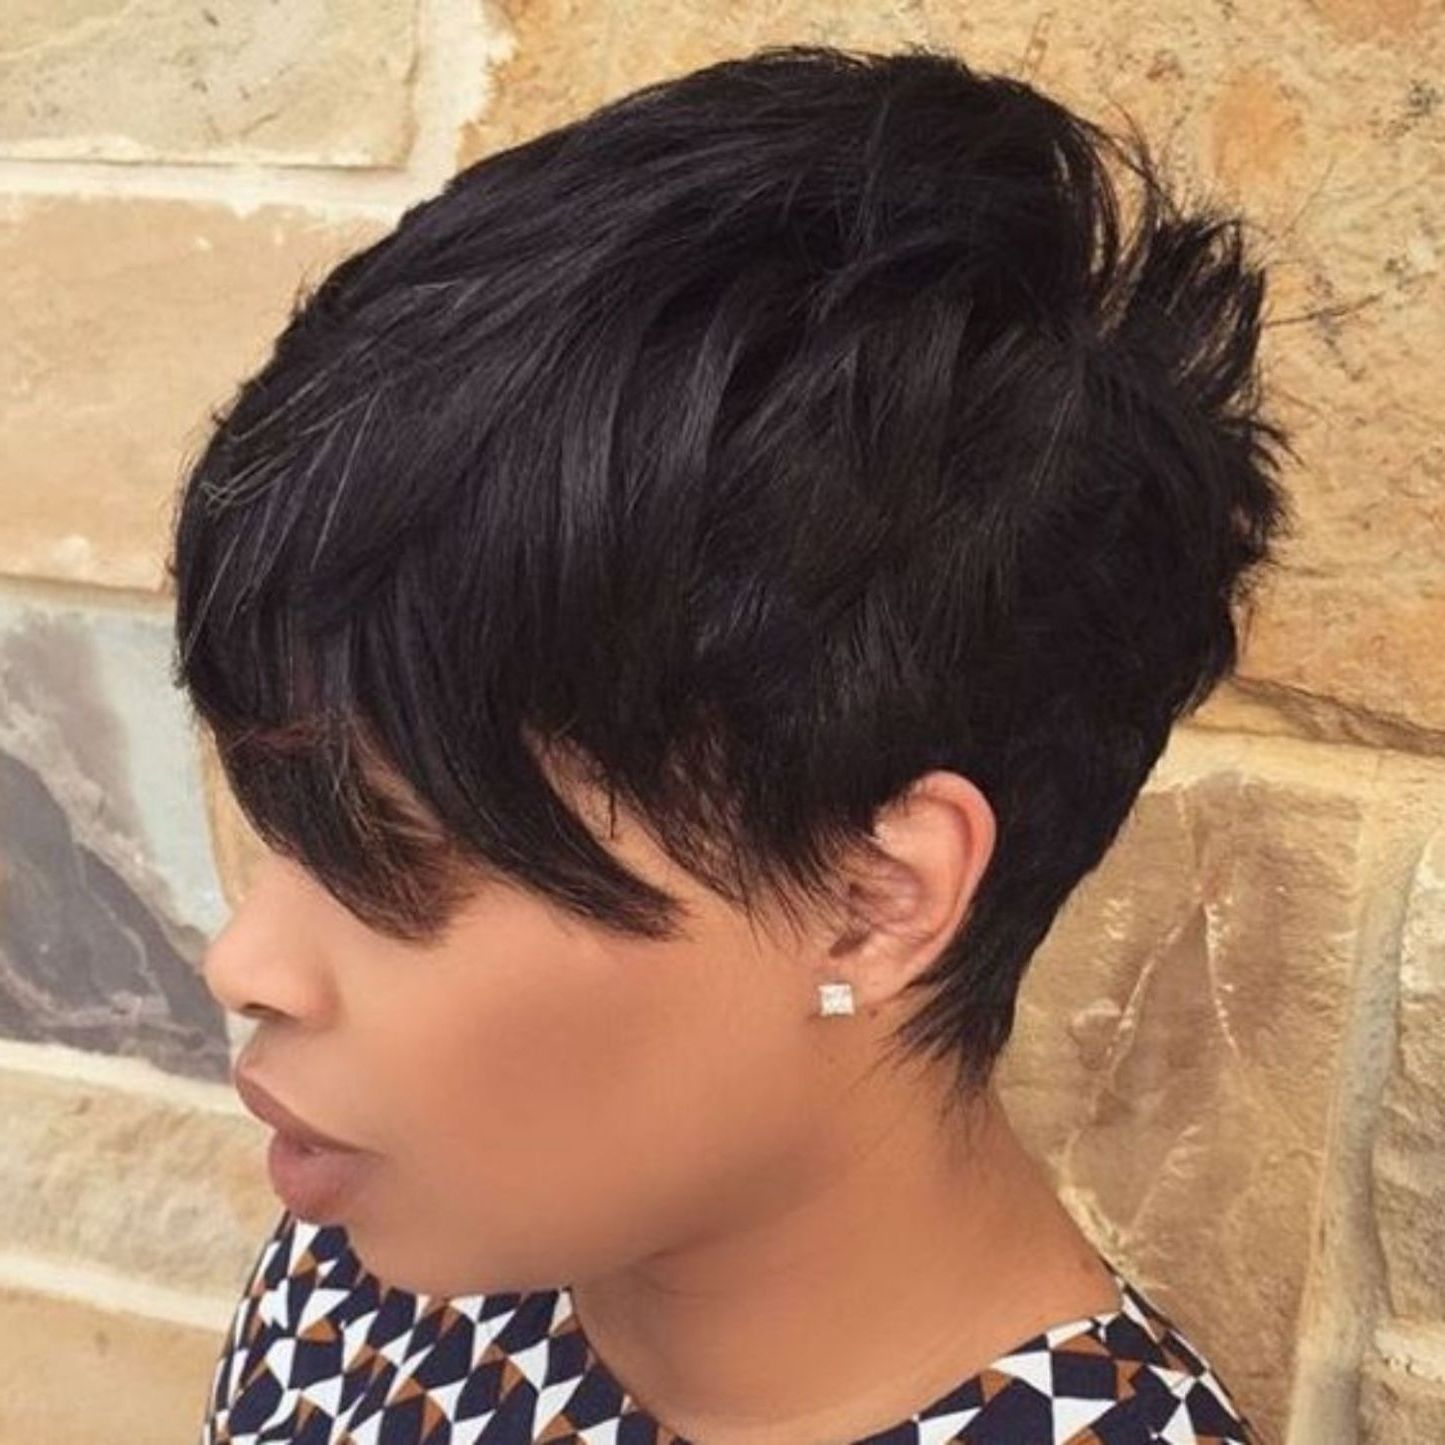 60 Great Short Hairstyles For Black Women | Hair Styles | Pinterest With Regard To 2018 Choppy Asymmetrical Black Pixie Haircuts (View 14 of 15)